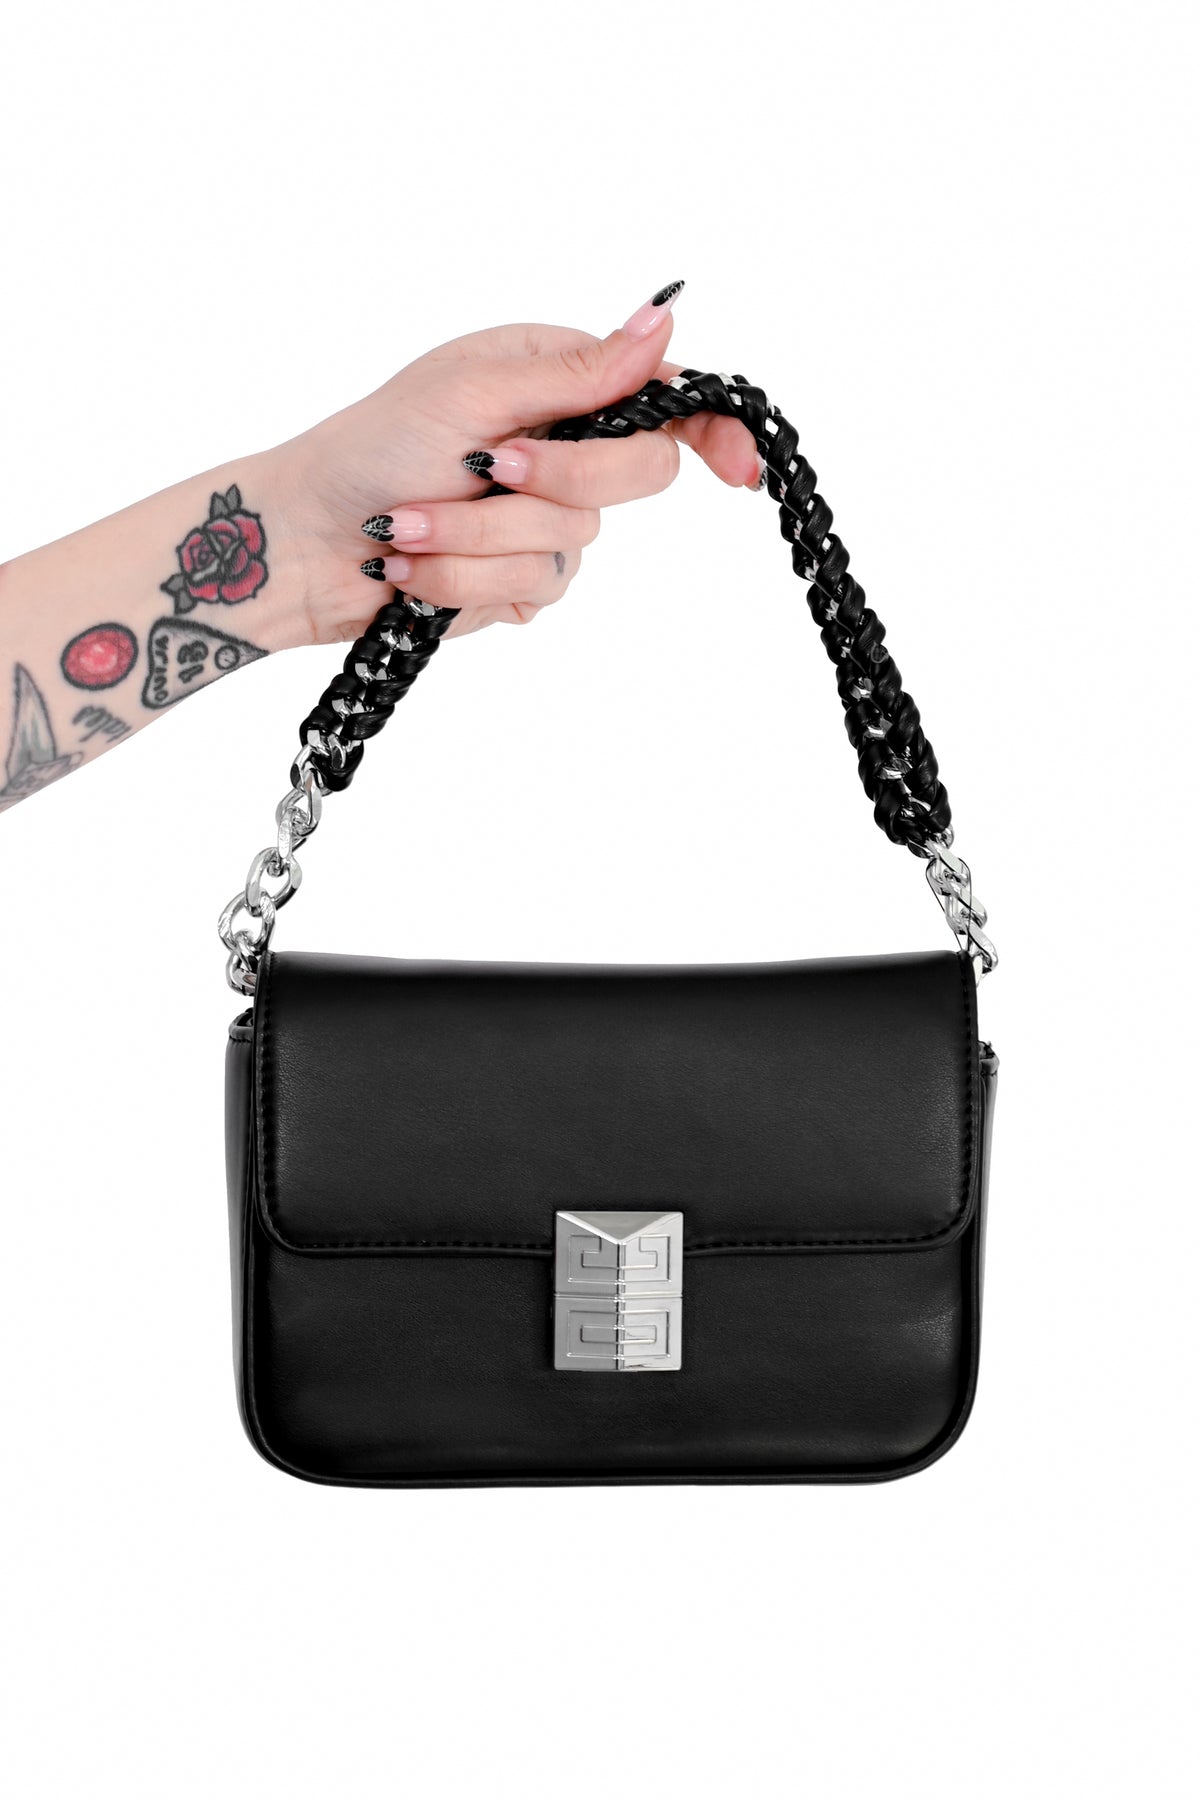 black faux leather bag with front detailed magnetic closure and faux leather braided chain top handle